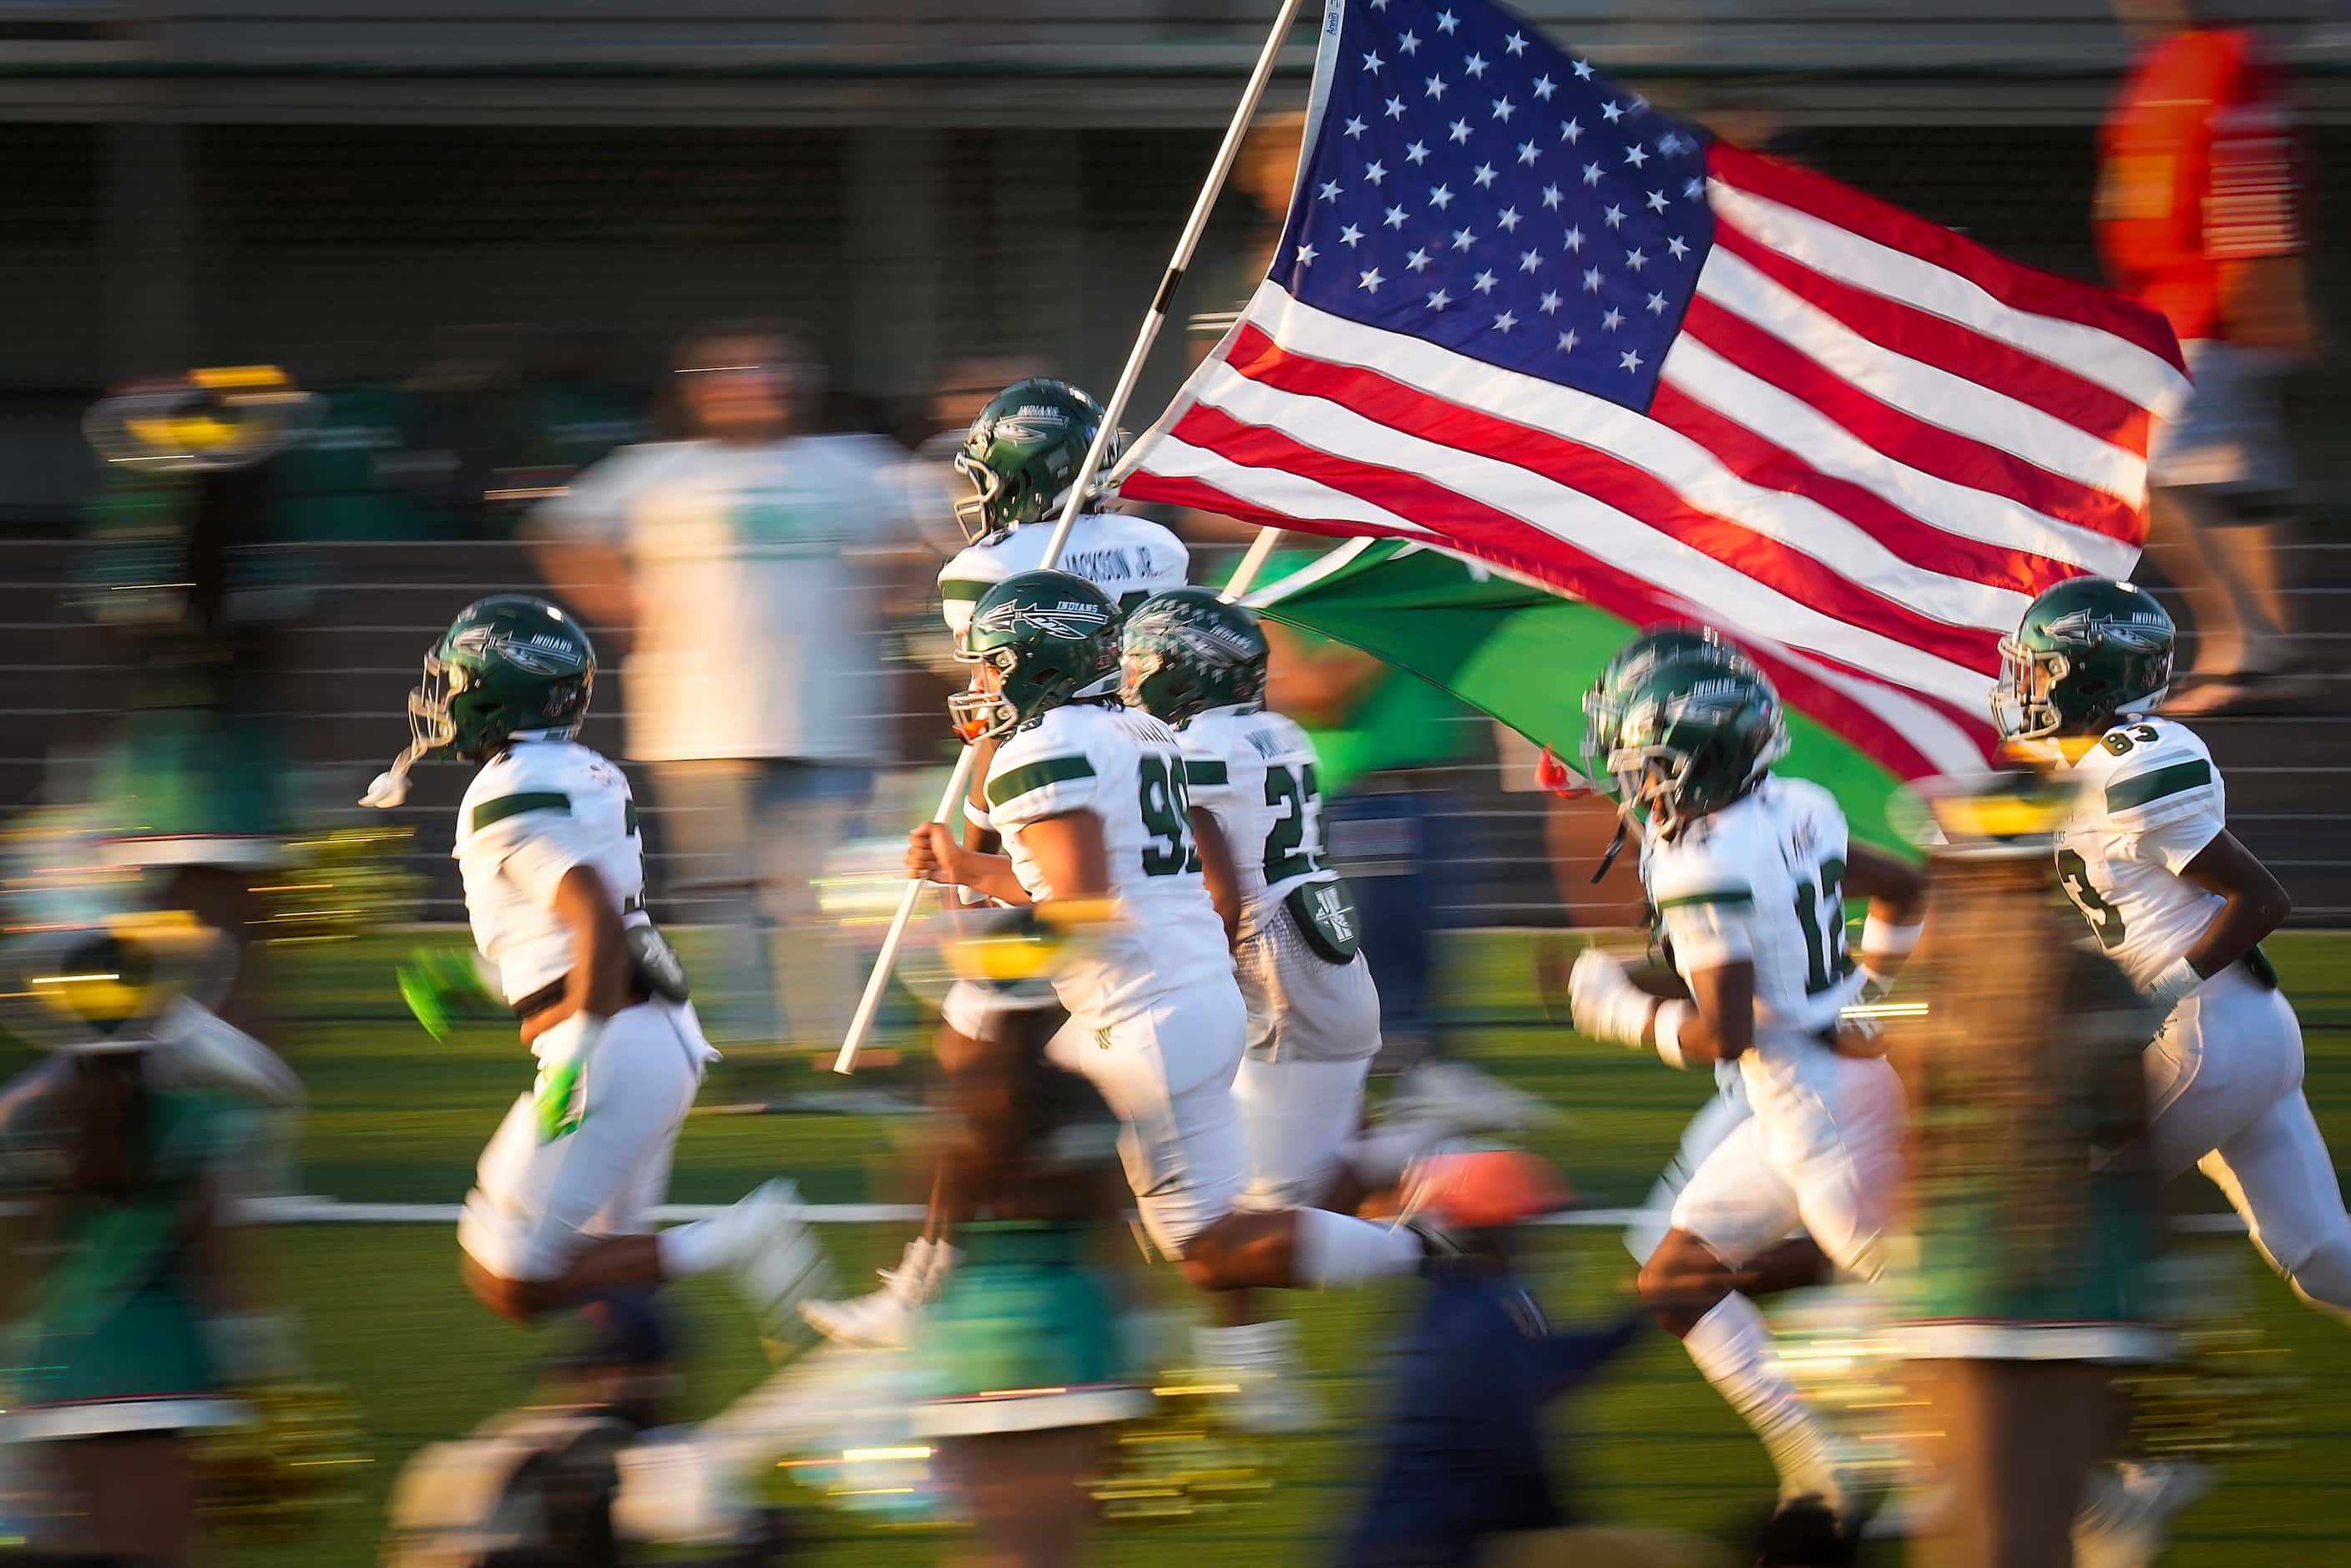 Waxahachie players carry the American flag as they take the field before a high school...